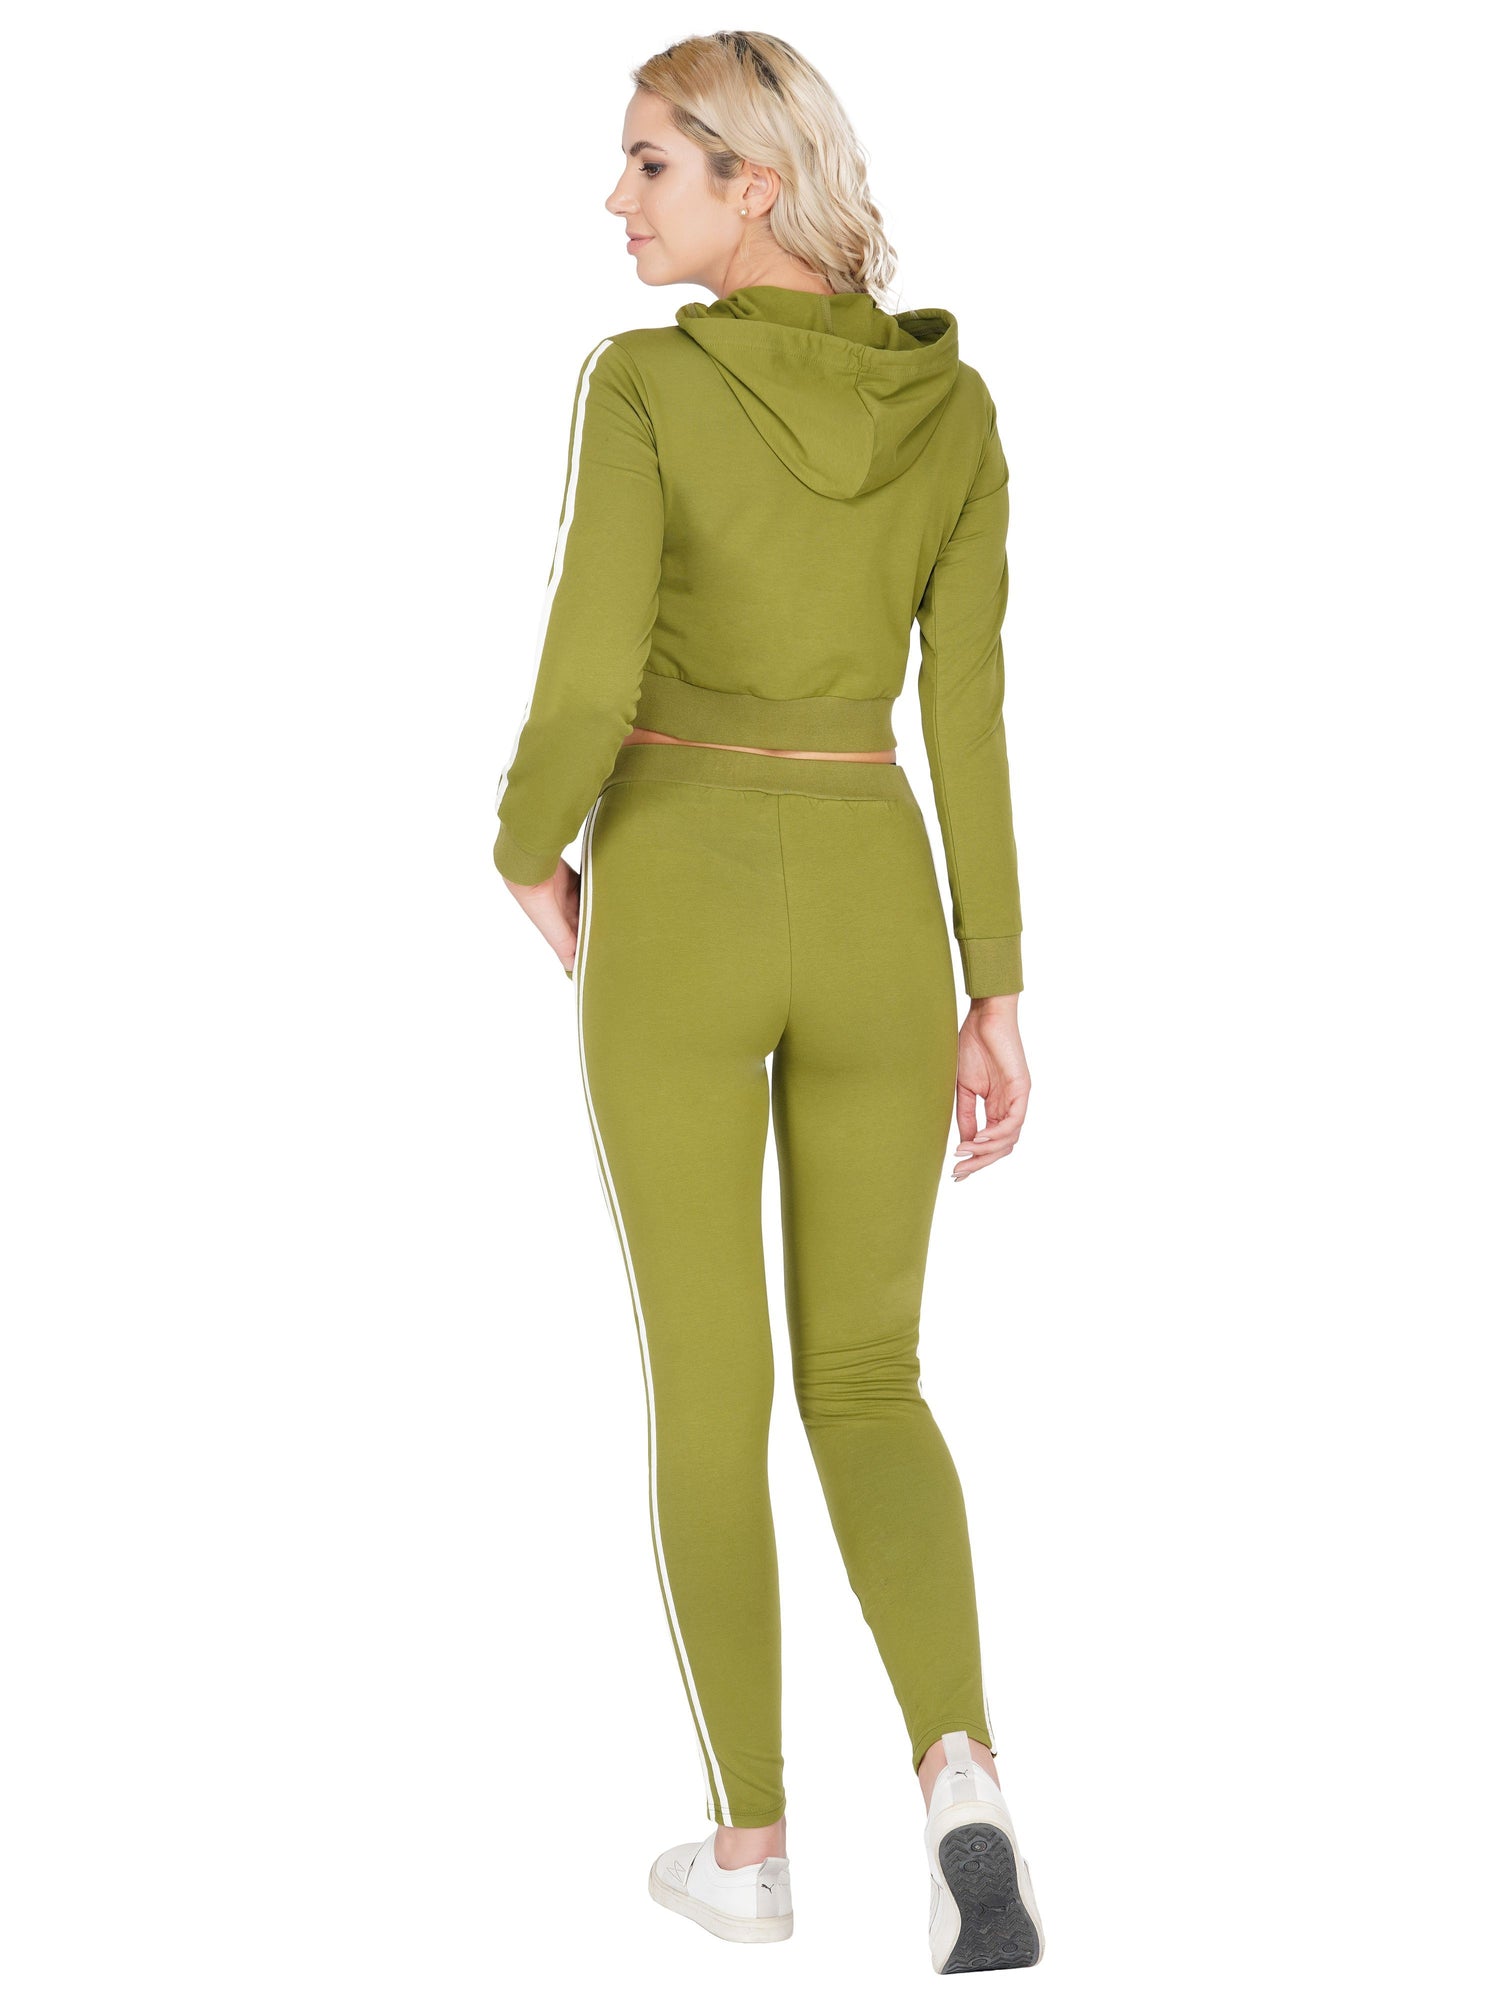 SLAY. Sport Women's Olive Green Printed Tracksuit with White Side Stripes-clothing-to-slay.myshopify.com-Tracksuit